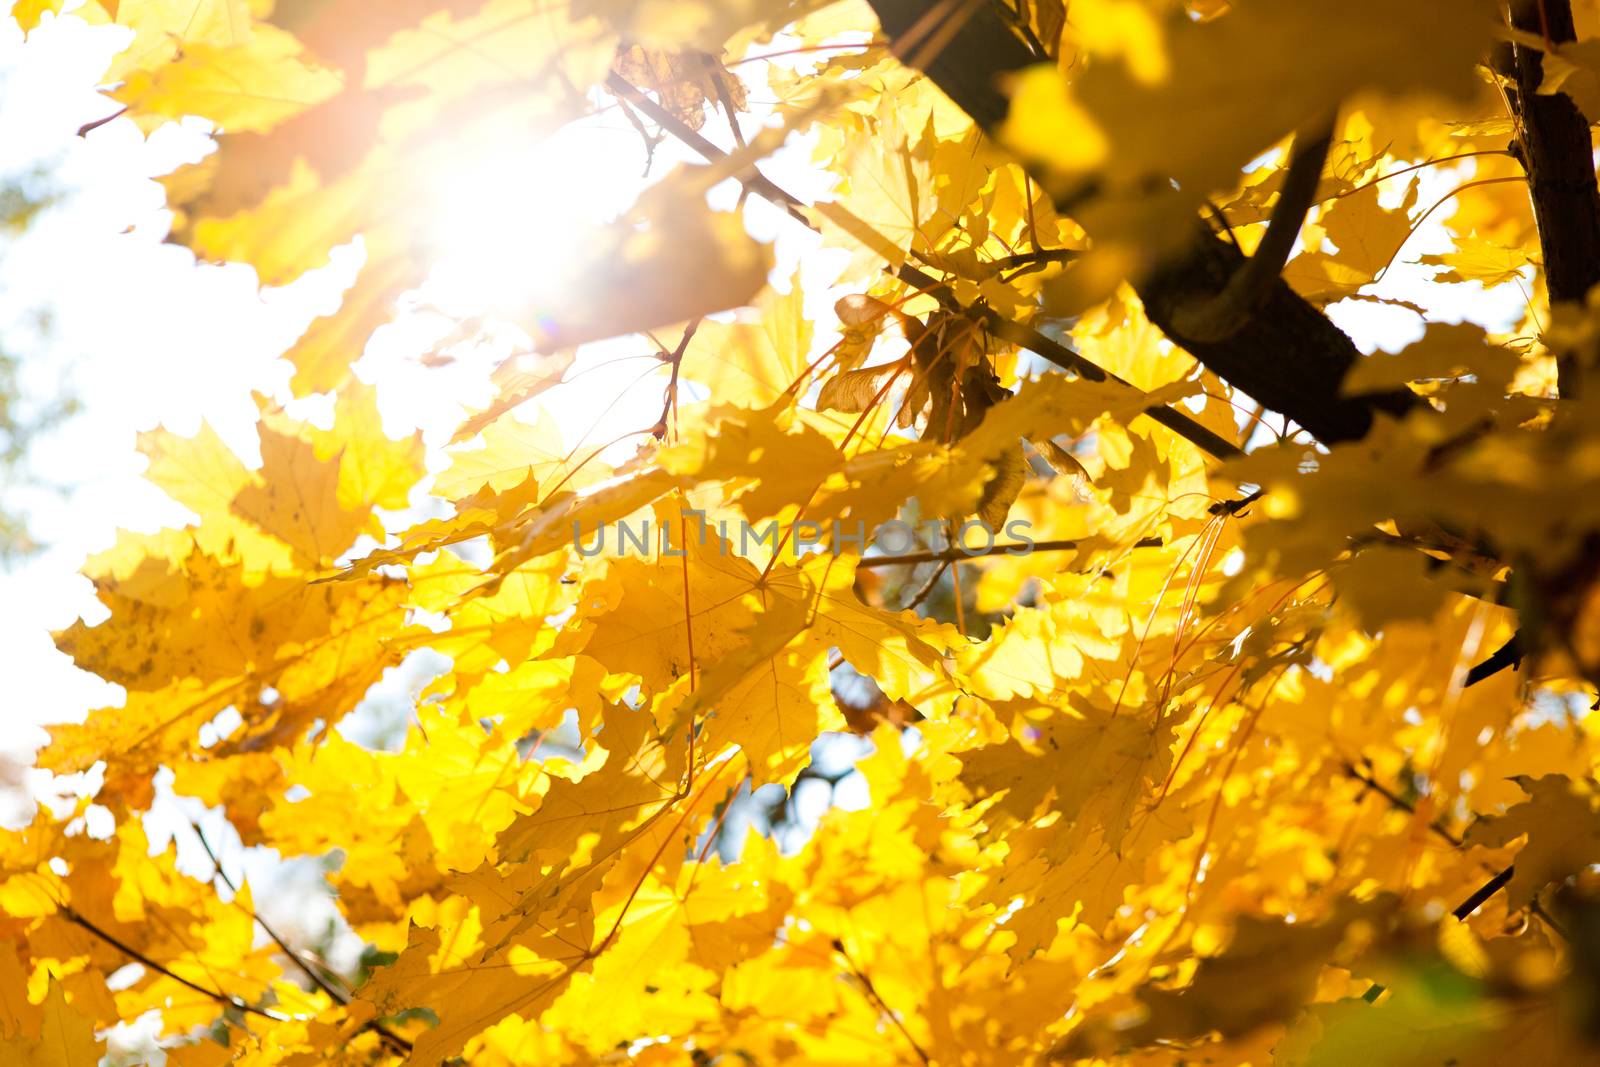 bright sun and autumn leaves